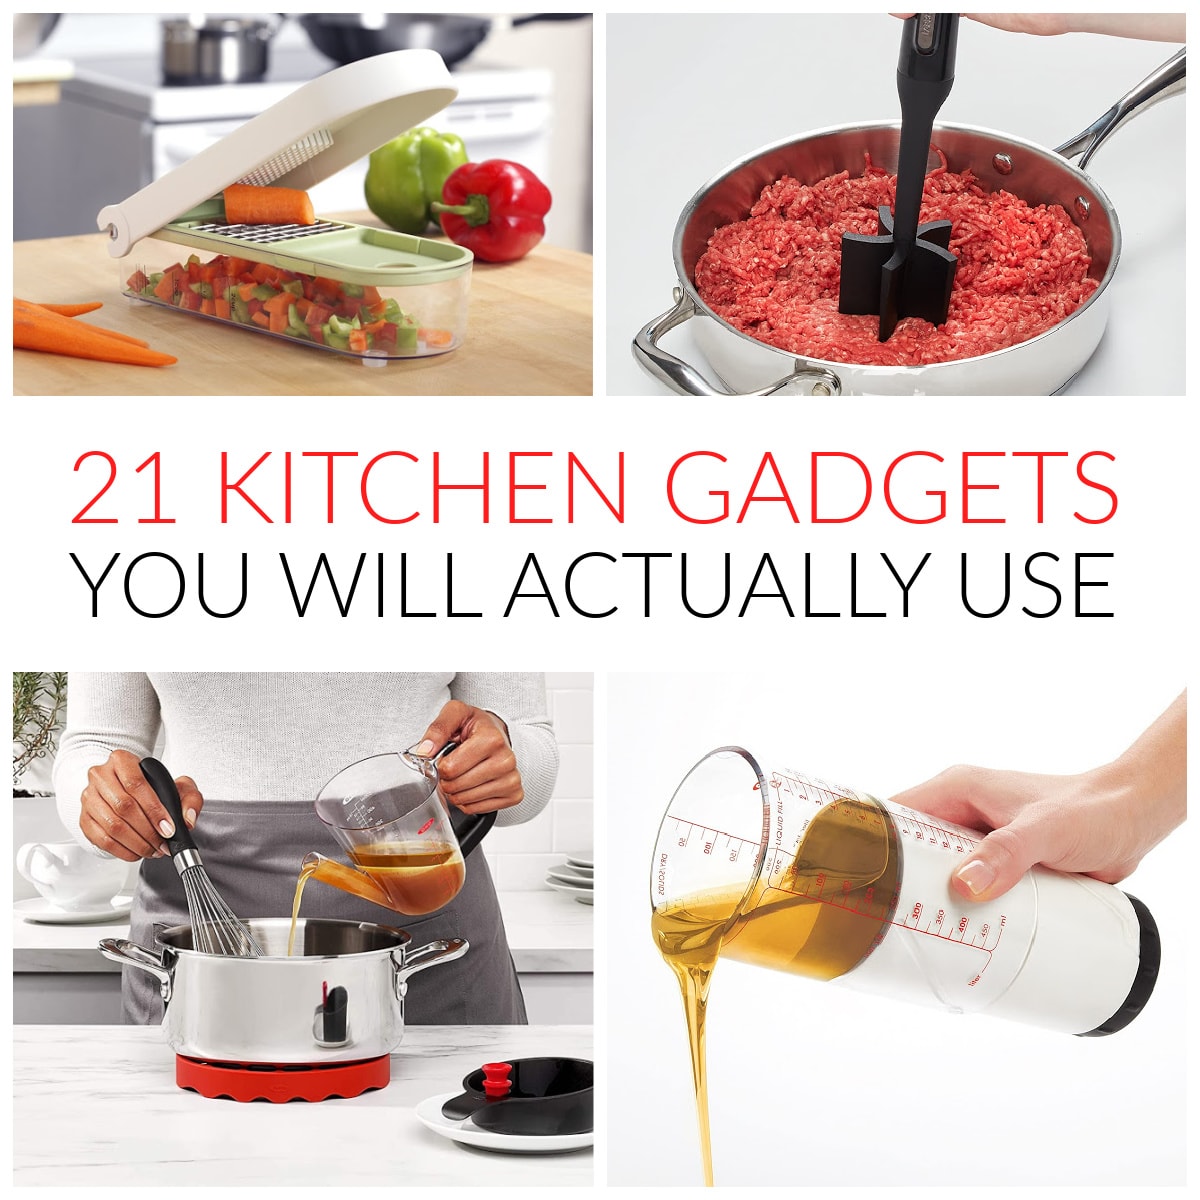 Cooking Gadgets You Should Know About